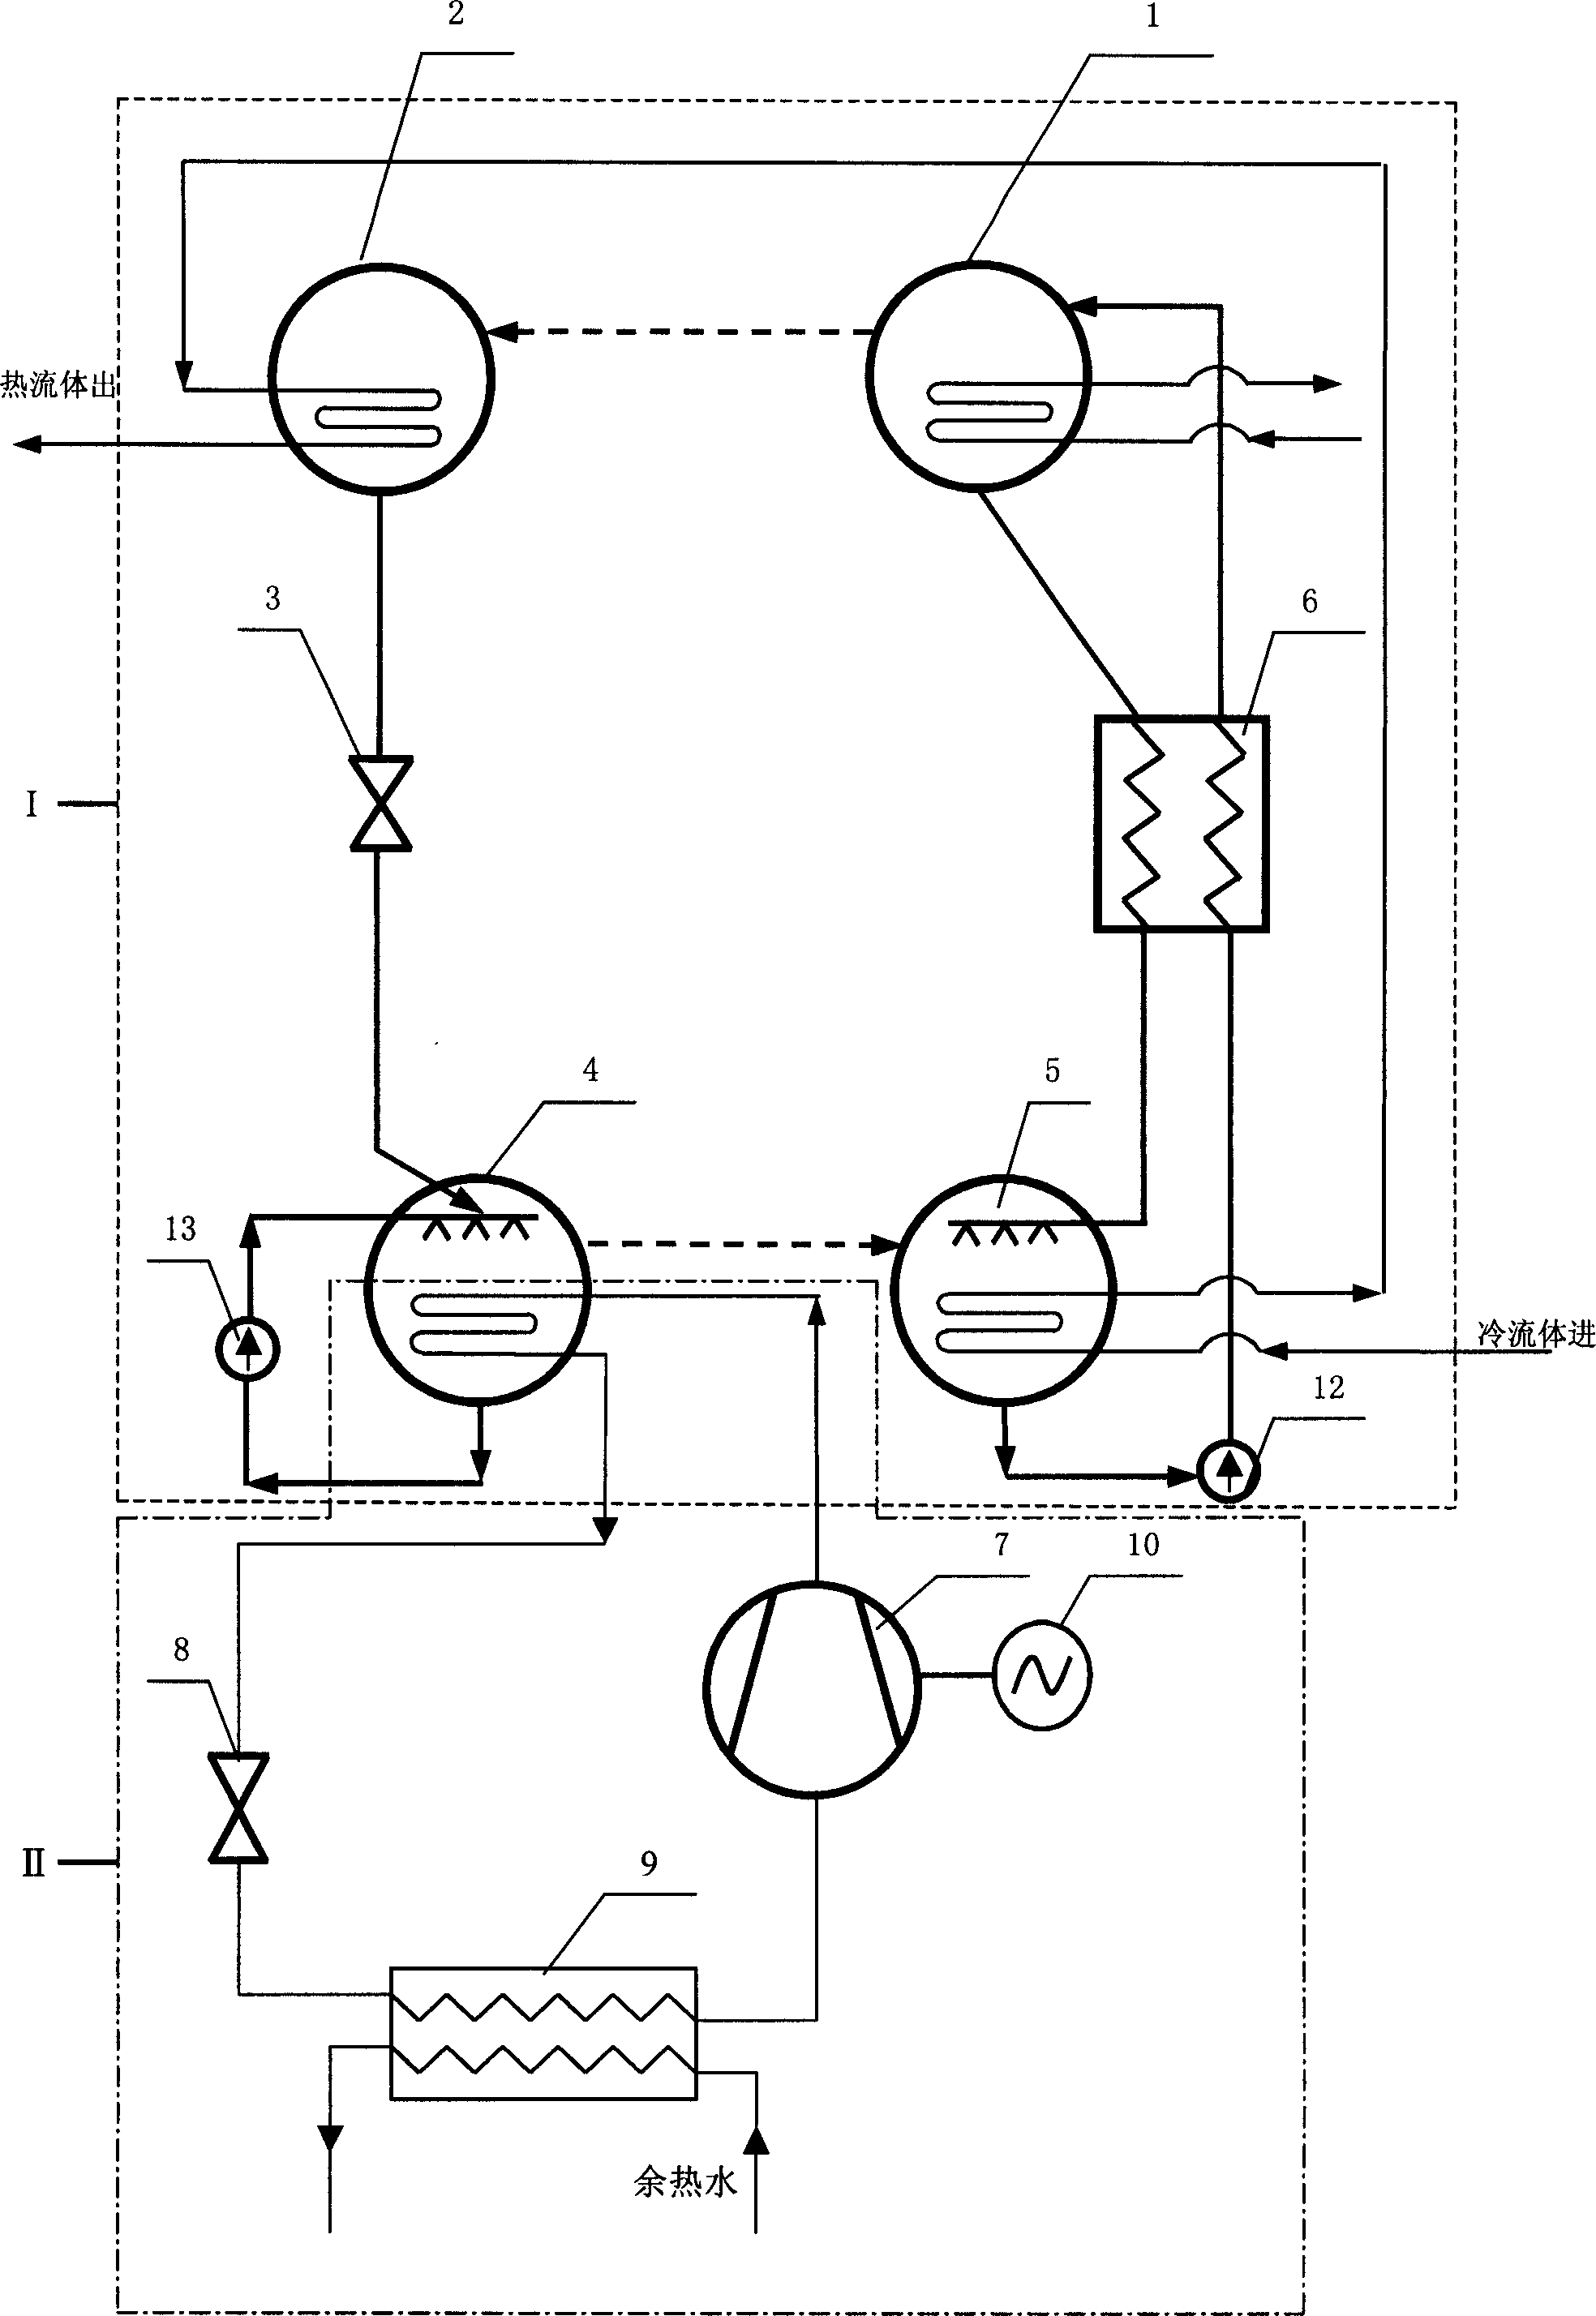 Compression-absorption combined heat pump heating system